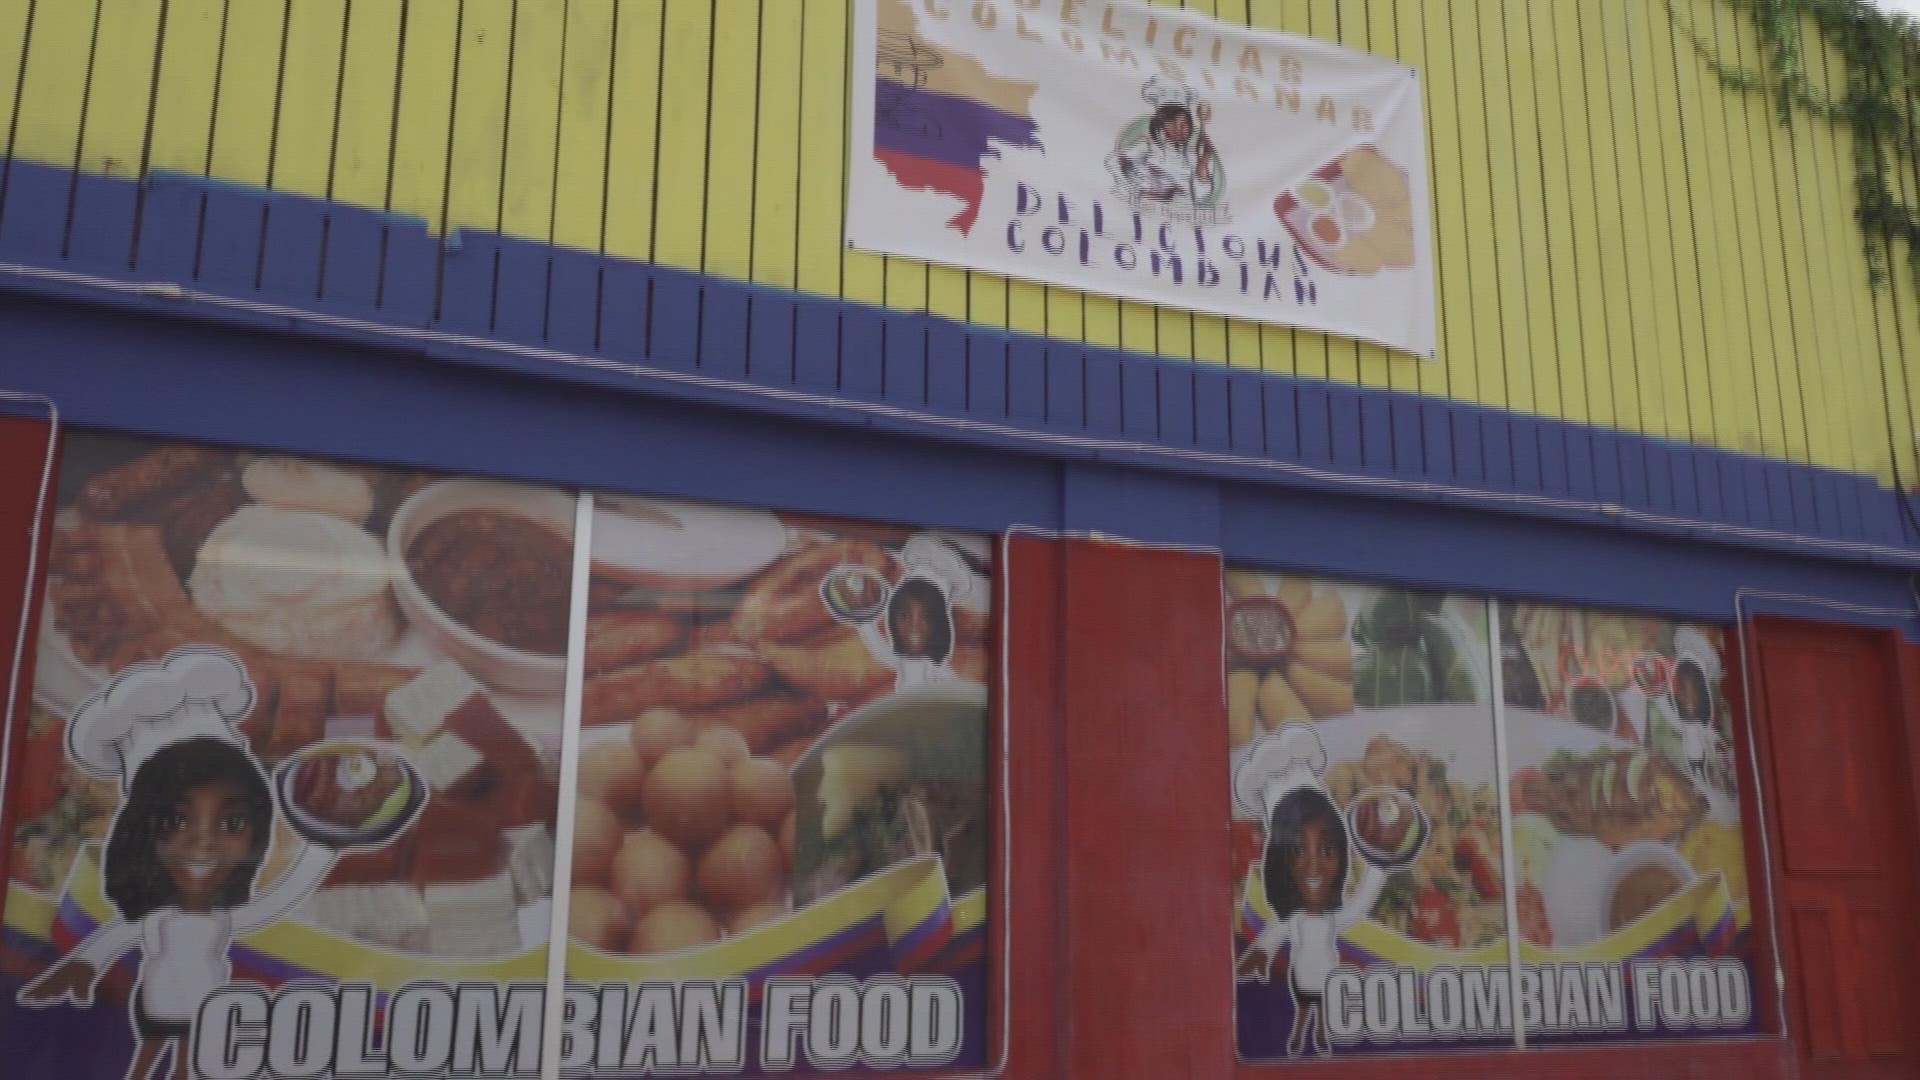 The family restaurant specializes in Colombian cuisine and is built on love.